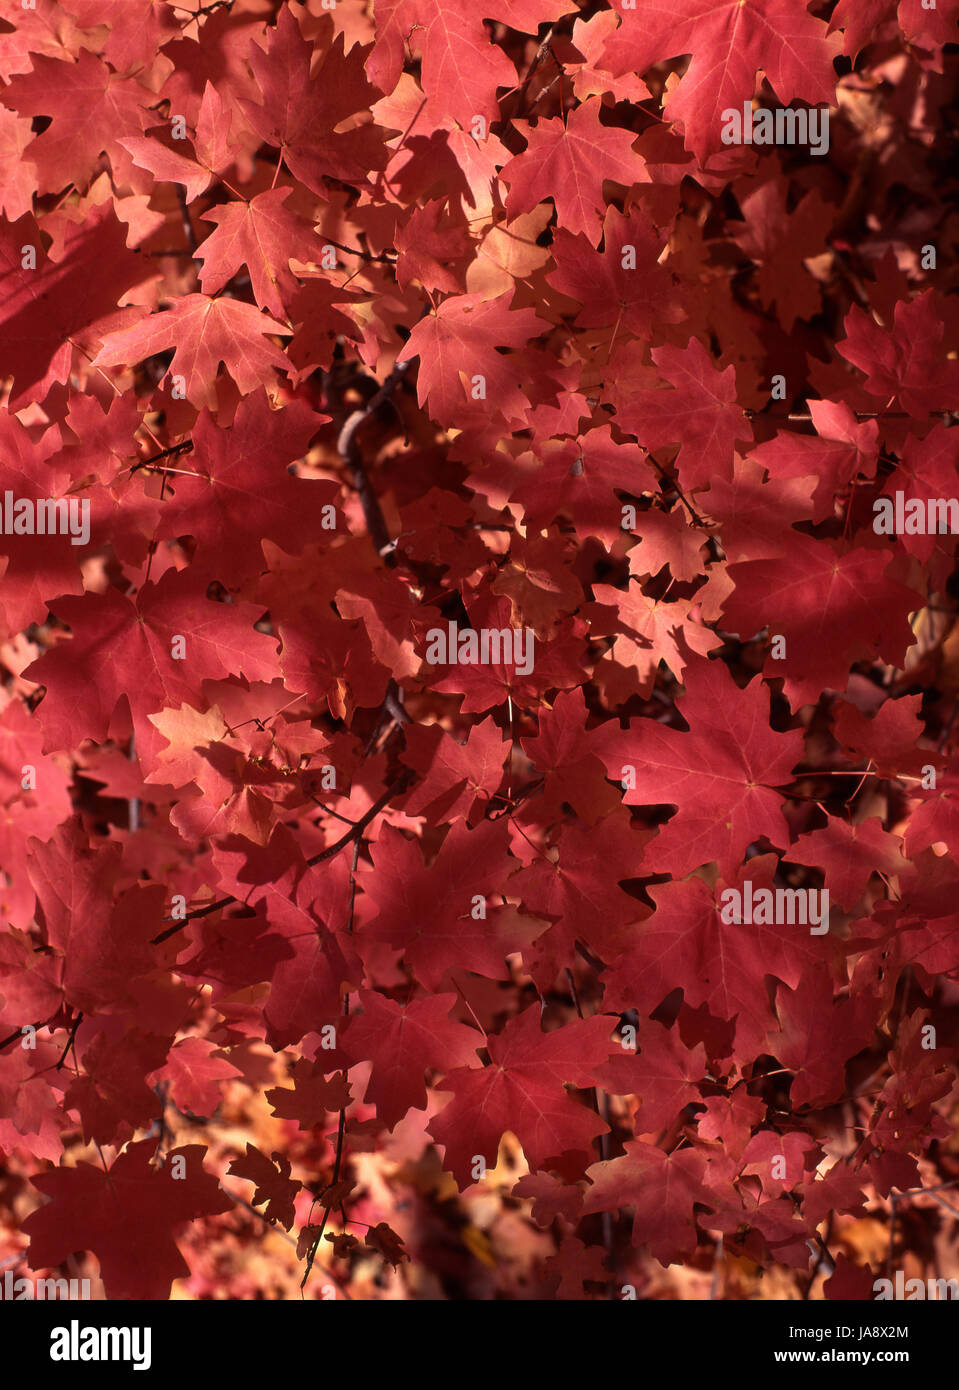 These maple leaves with the red color of autumn.. This image is meant to be used a textured or abstract background for a product or another image. Stock Photo